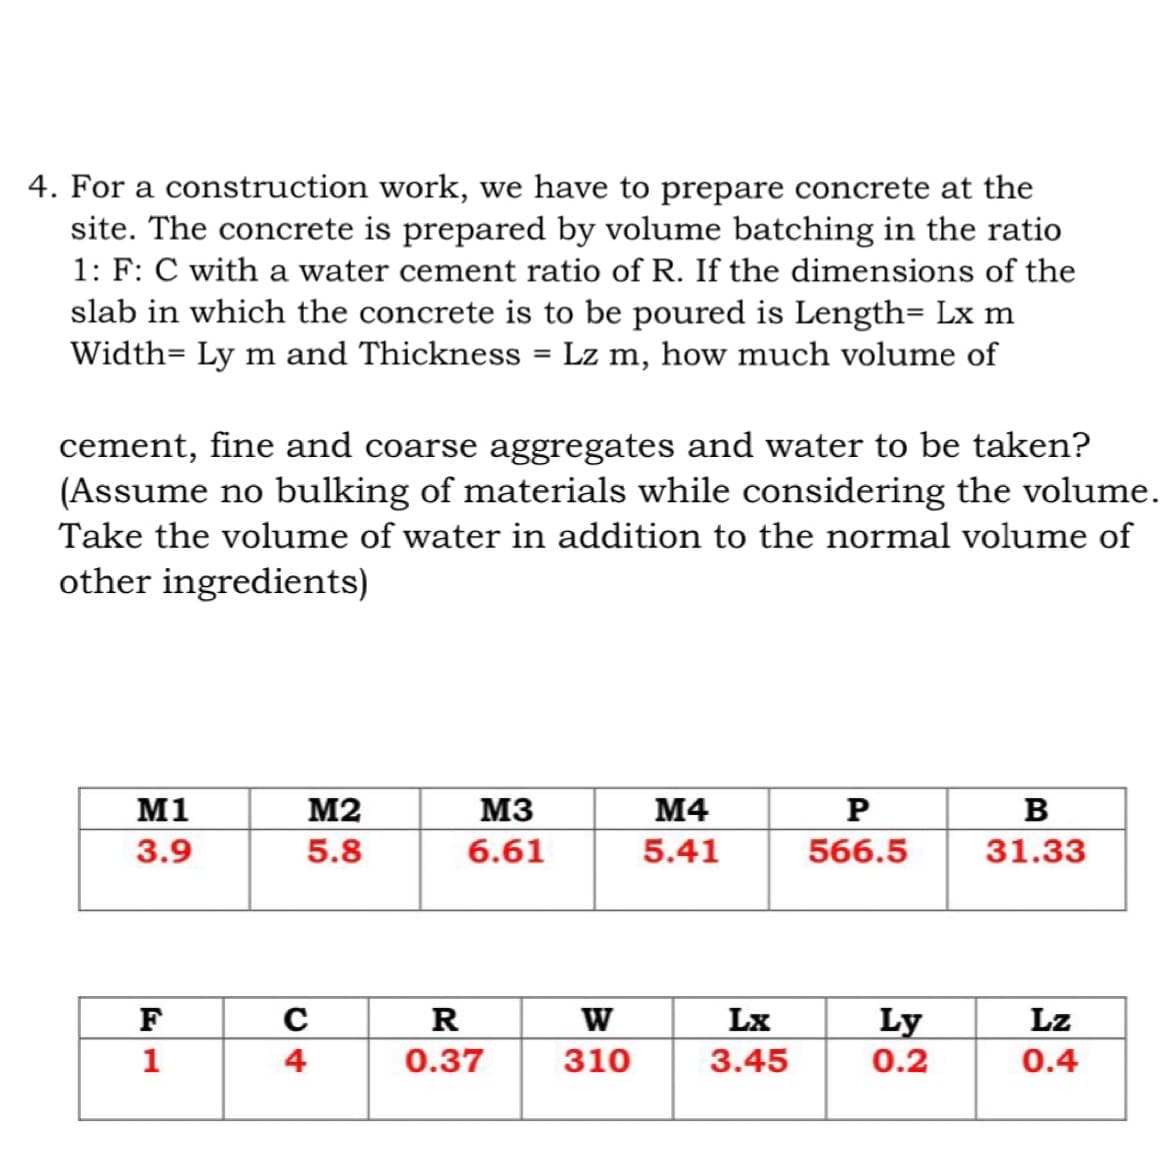 4. For a construction work, we have to prepare concrete at the
site. The concrete is prepared by volume batching in the ratio
1: F: C with a water cement ratio of R. If the dimensions of the
slab in which the concrete is to be poured is Length= Lx m
Width Ly m and Thickness = Lz m, how much volume of
cement, fine and coarse aggregates and water to be taken?
(Assume no bulking of materials while considering the volume.
Take the volume of water in addition to the normal volume of
other ingredients)
M1
M2
M3
M4
P
566.5
B
31.33
3.9
5.8
6.61
5.41
F
Lz
1
0.4
C4
C
4
R
0.37
W
310
Lx
3.45
Ly
0.2